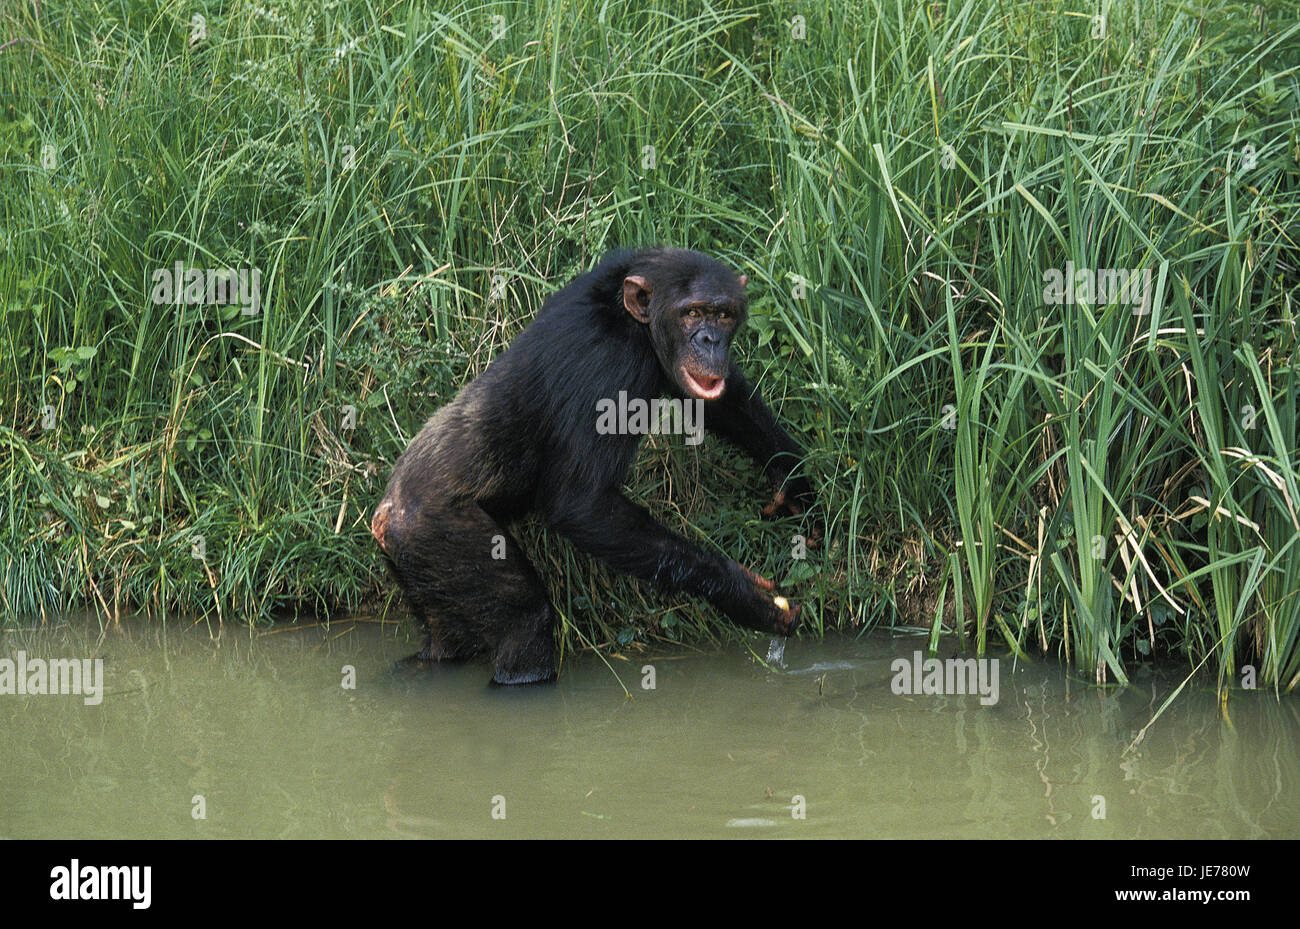 Common chimpanzee, Pan troglodytes, adult animal stands in the water, Stock Photo